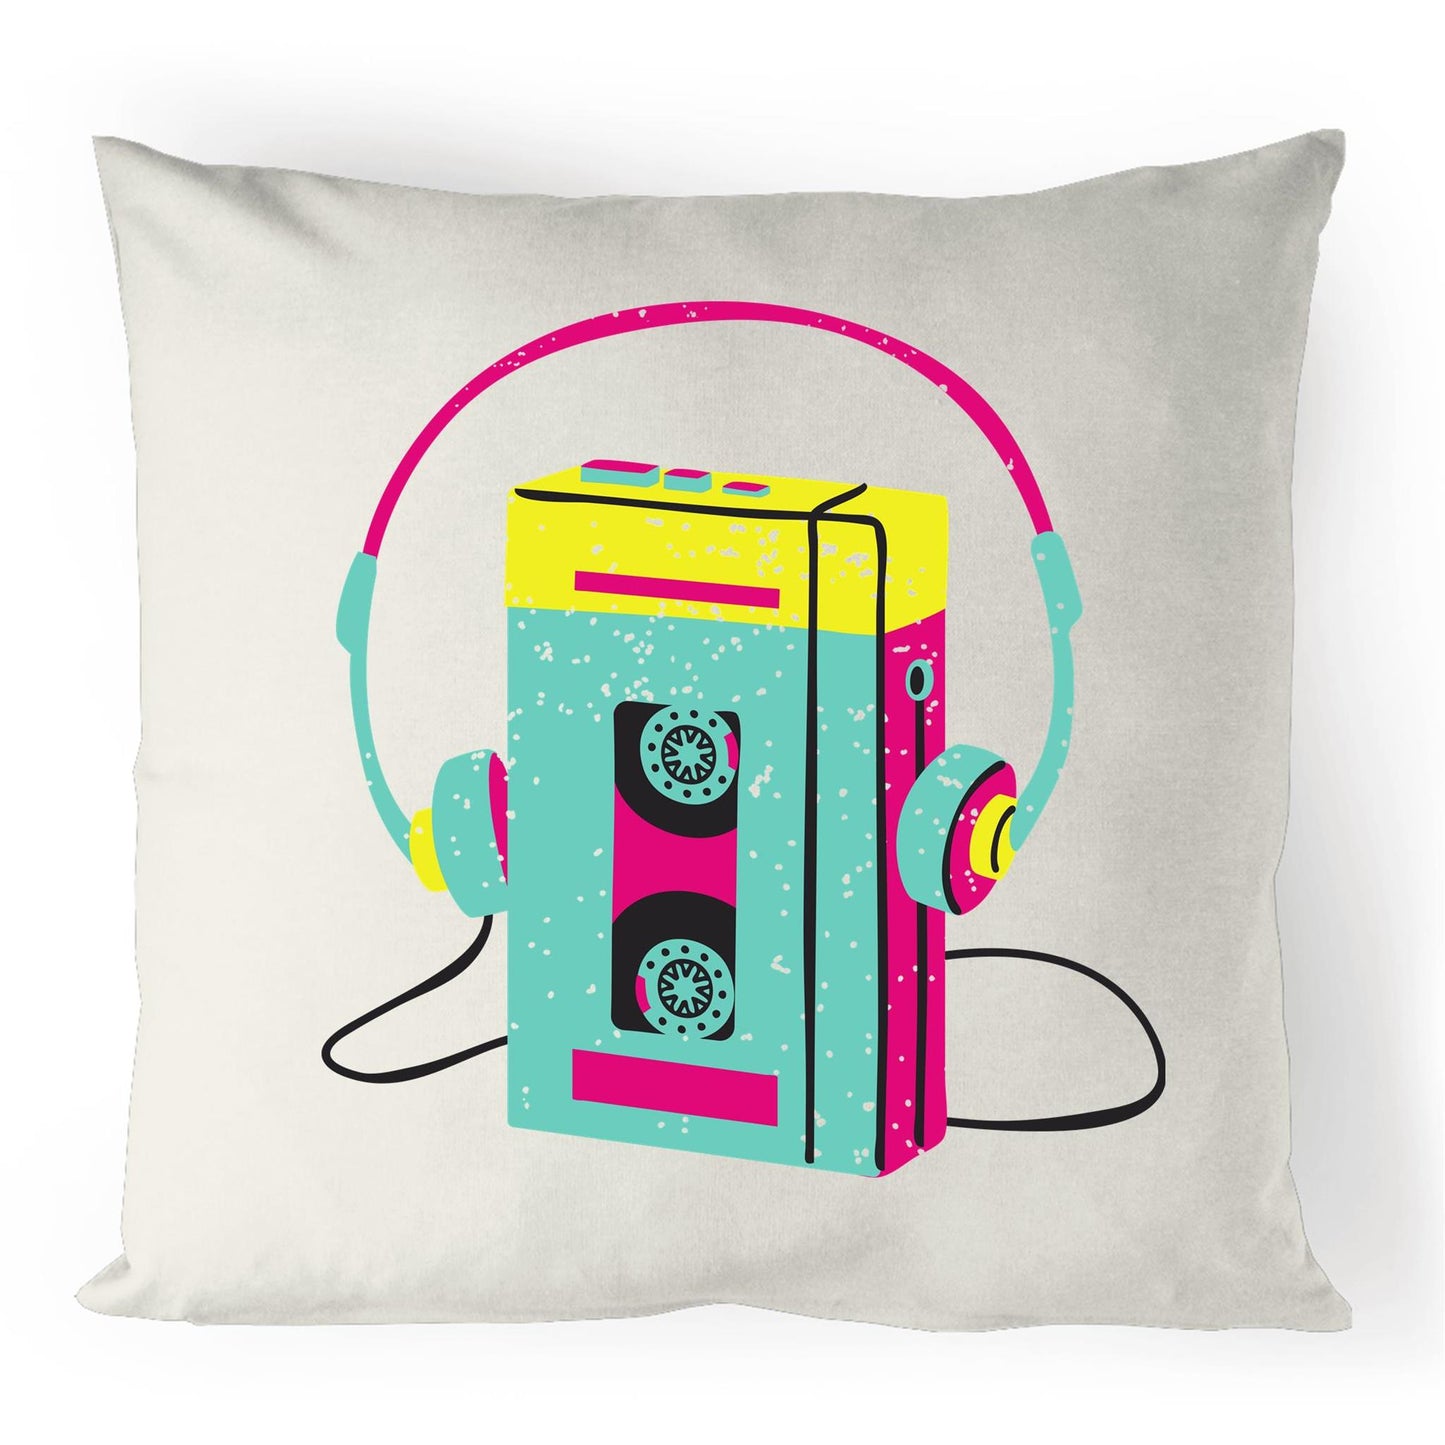 Wired For Sound, Music Player - 100% Linen Cushion Cover Natural One-Size Linen Cushion Cover Music Retro